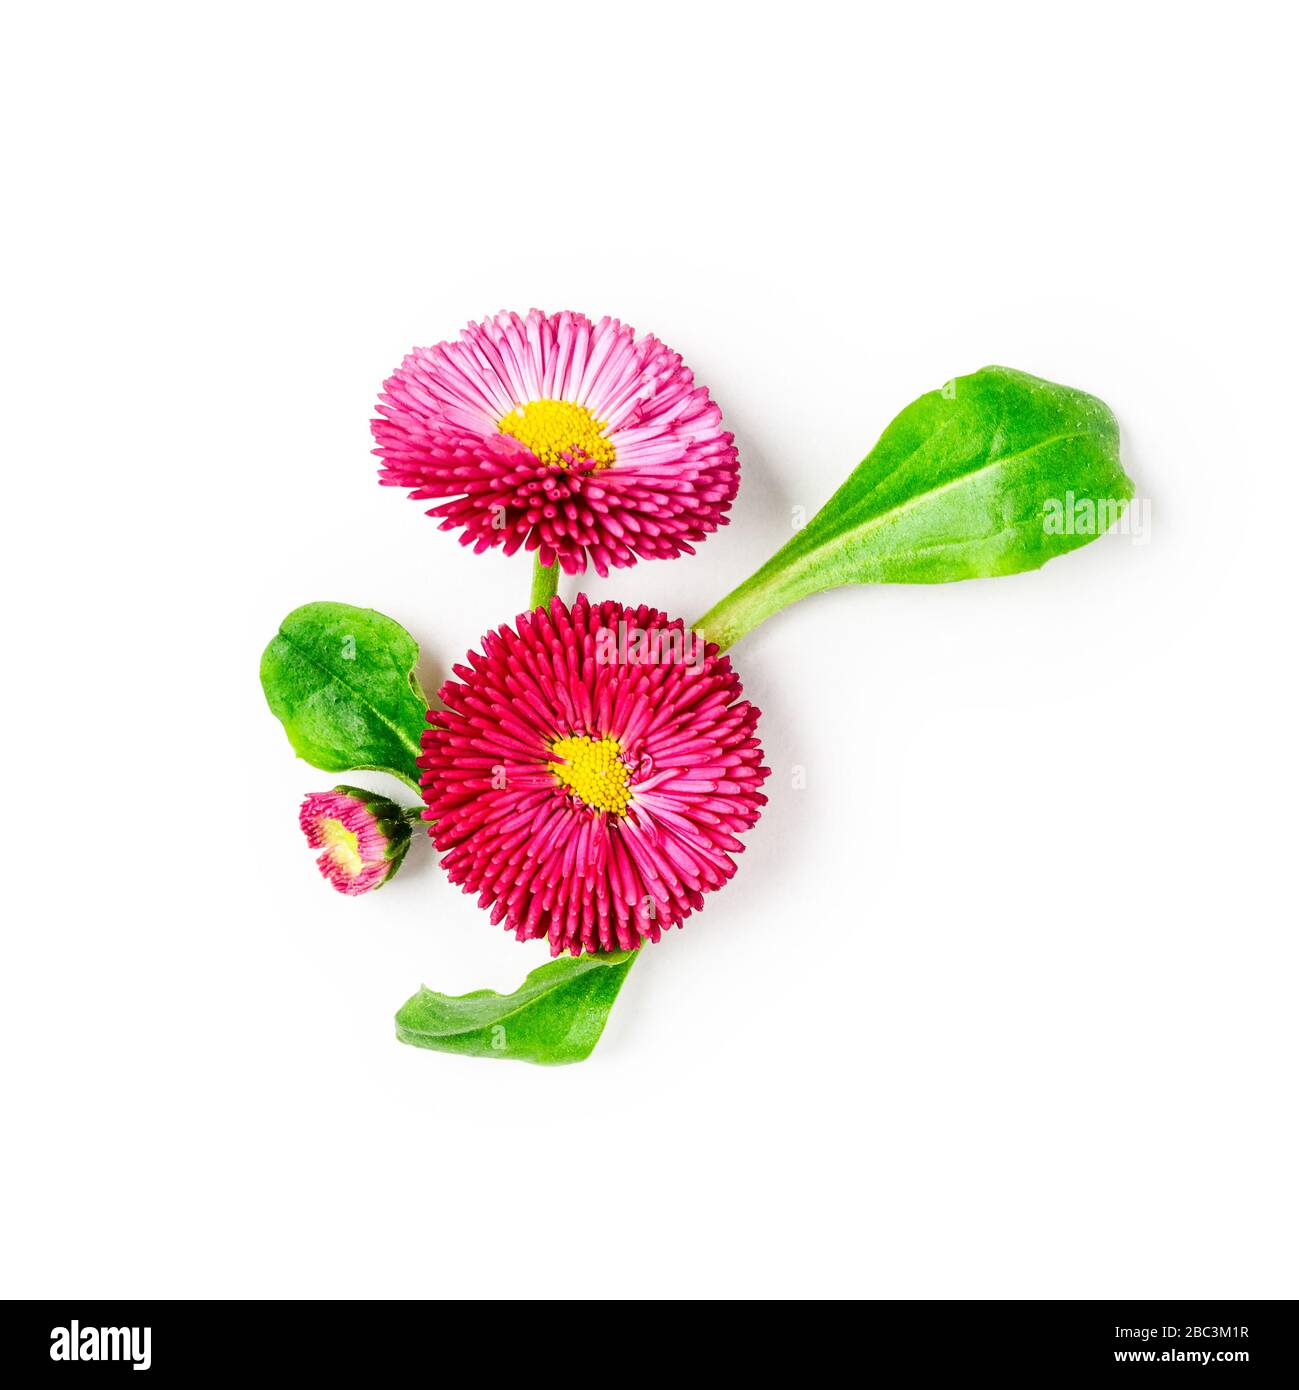 Daisy flower creative composition. Pink bellis perennis flowers isolated on white background with clipping path. Floral arrangement, design element. S Stock Photo